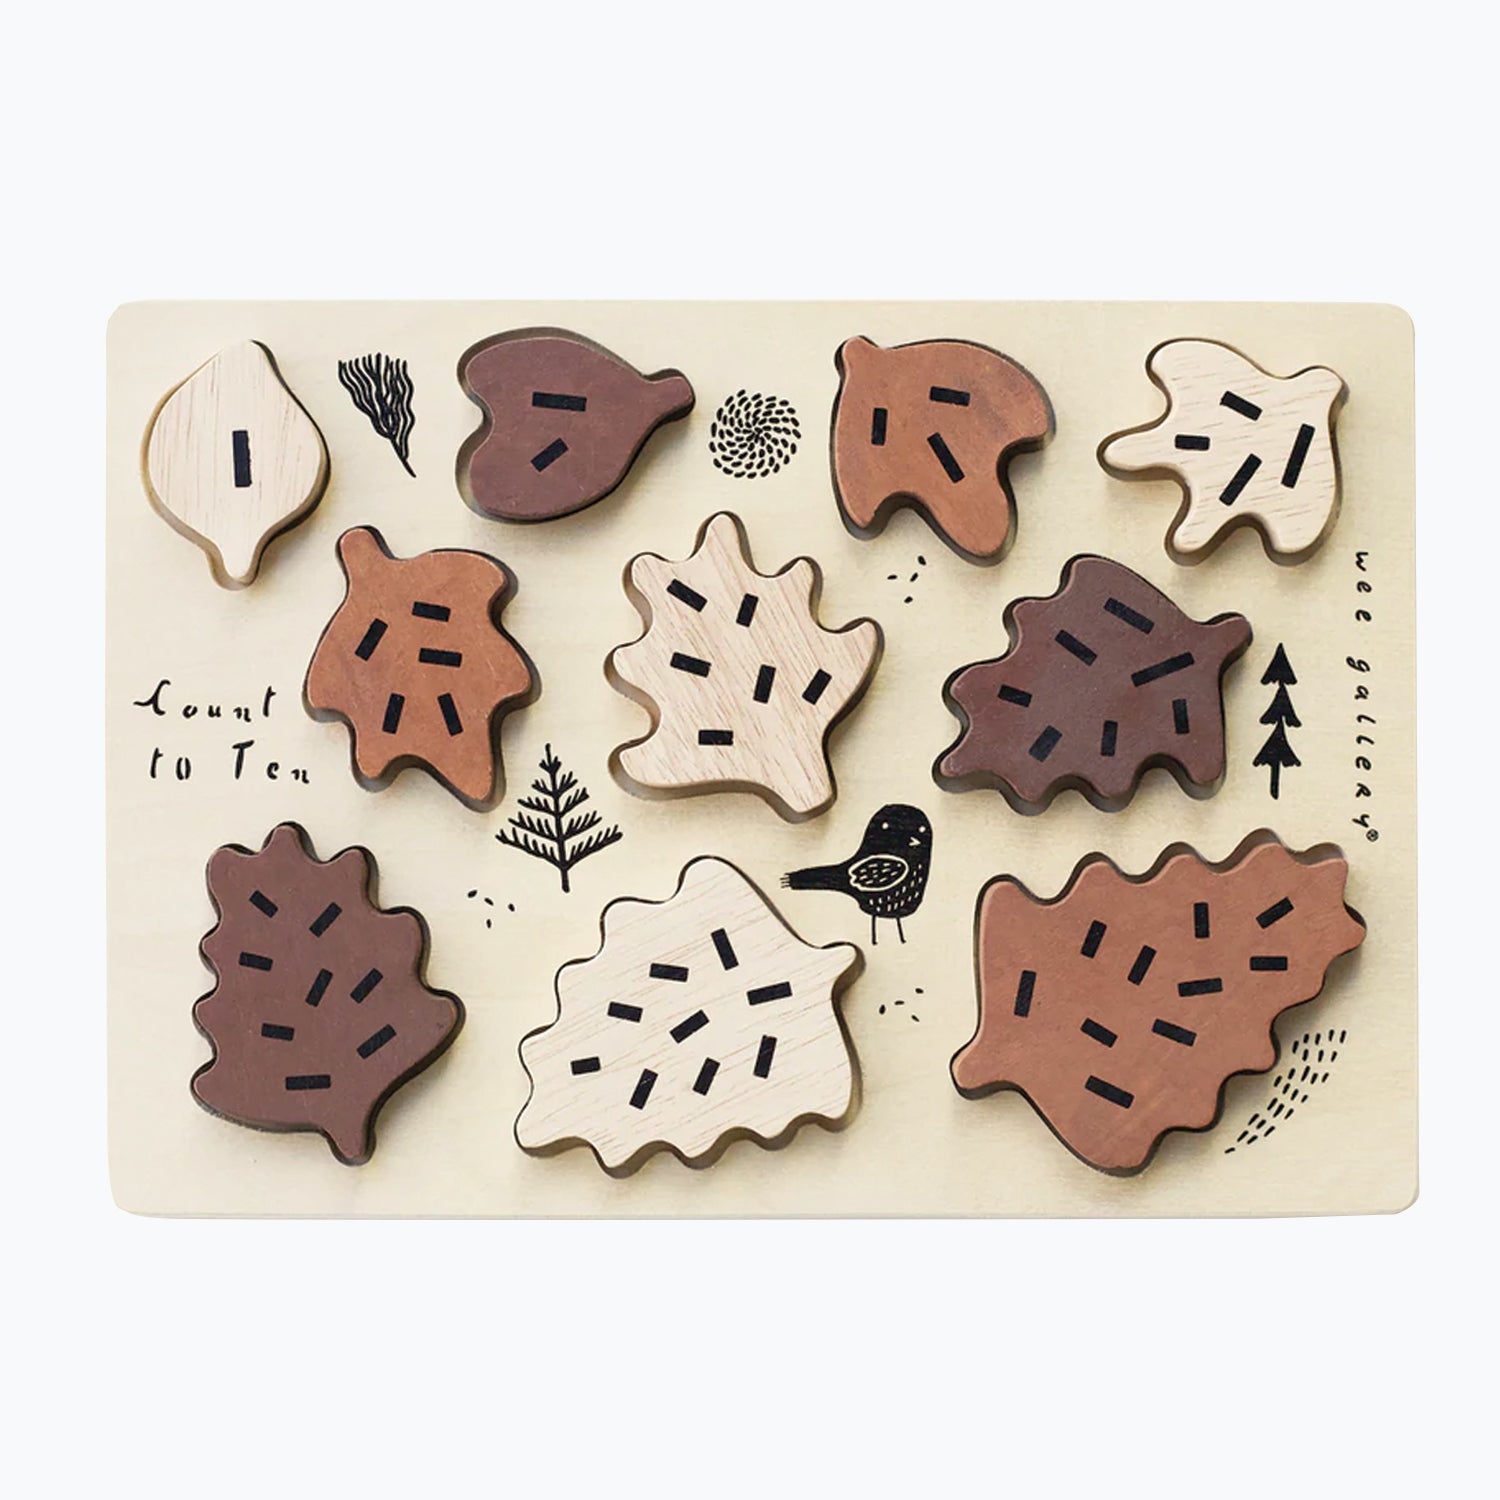 An image of Wee Gallery Count To 10 Leaves Game - Counting Game - Wooden Blocks | Wee Galler...